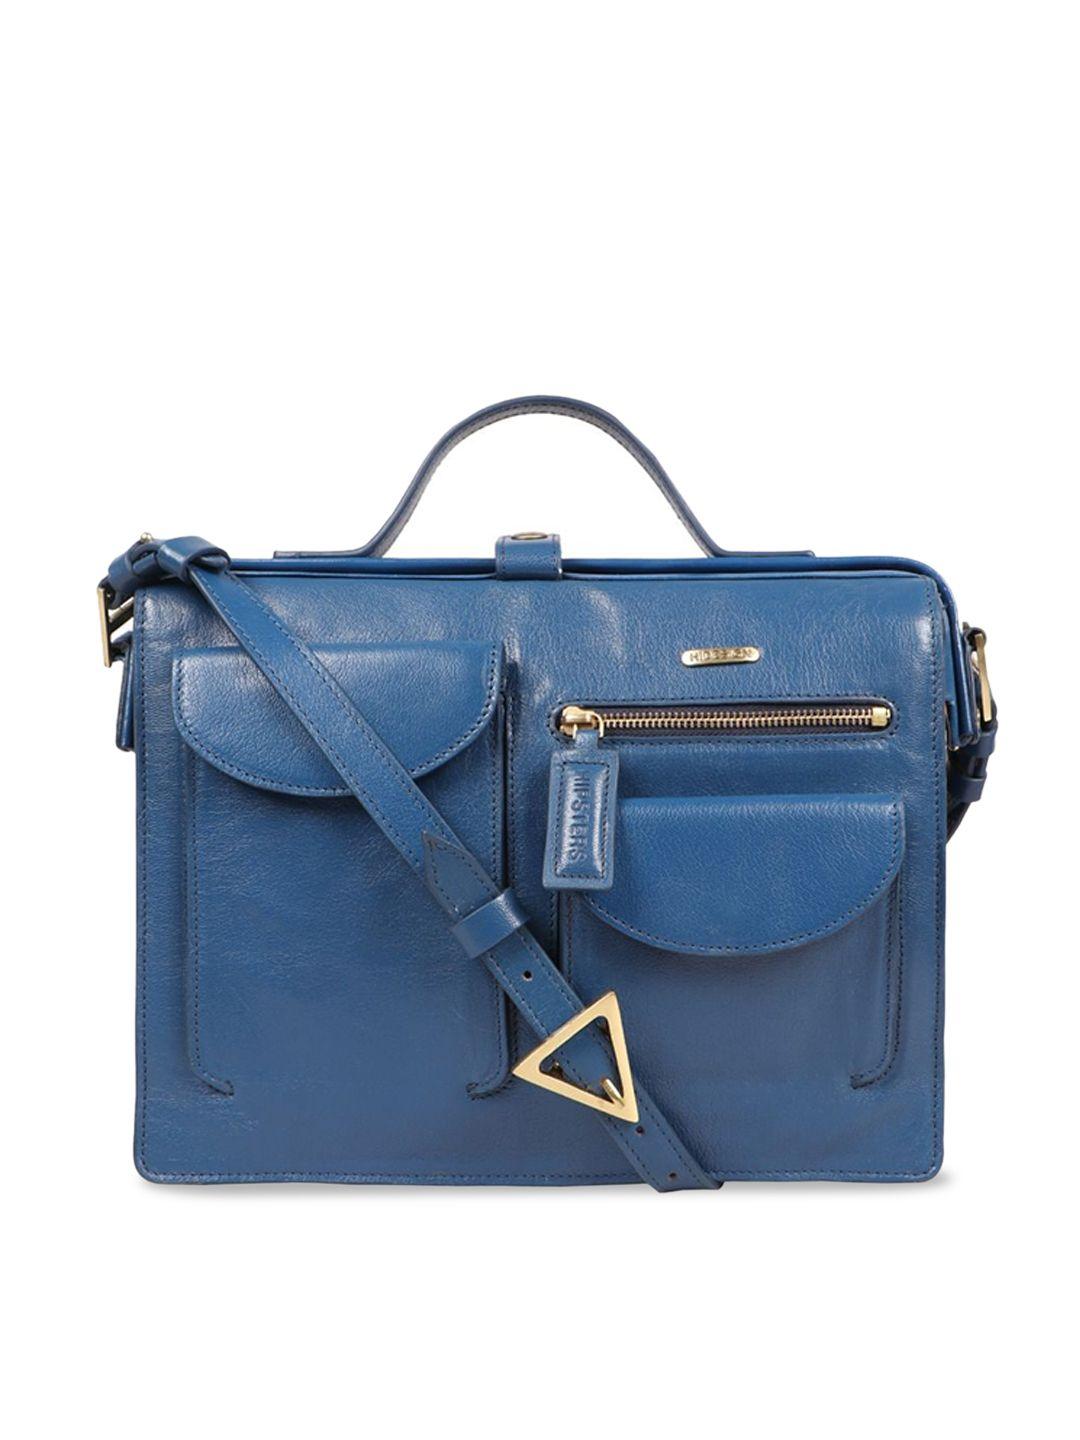 hidesign leather structured satchel